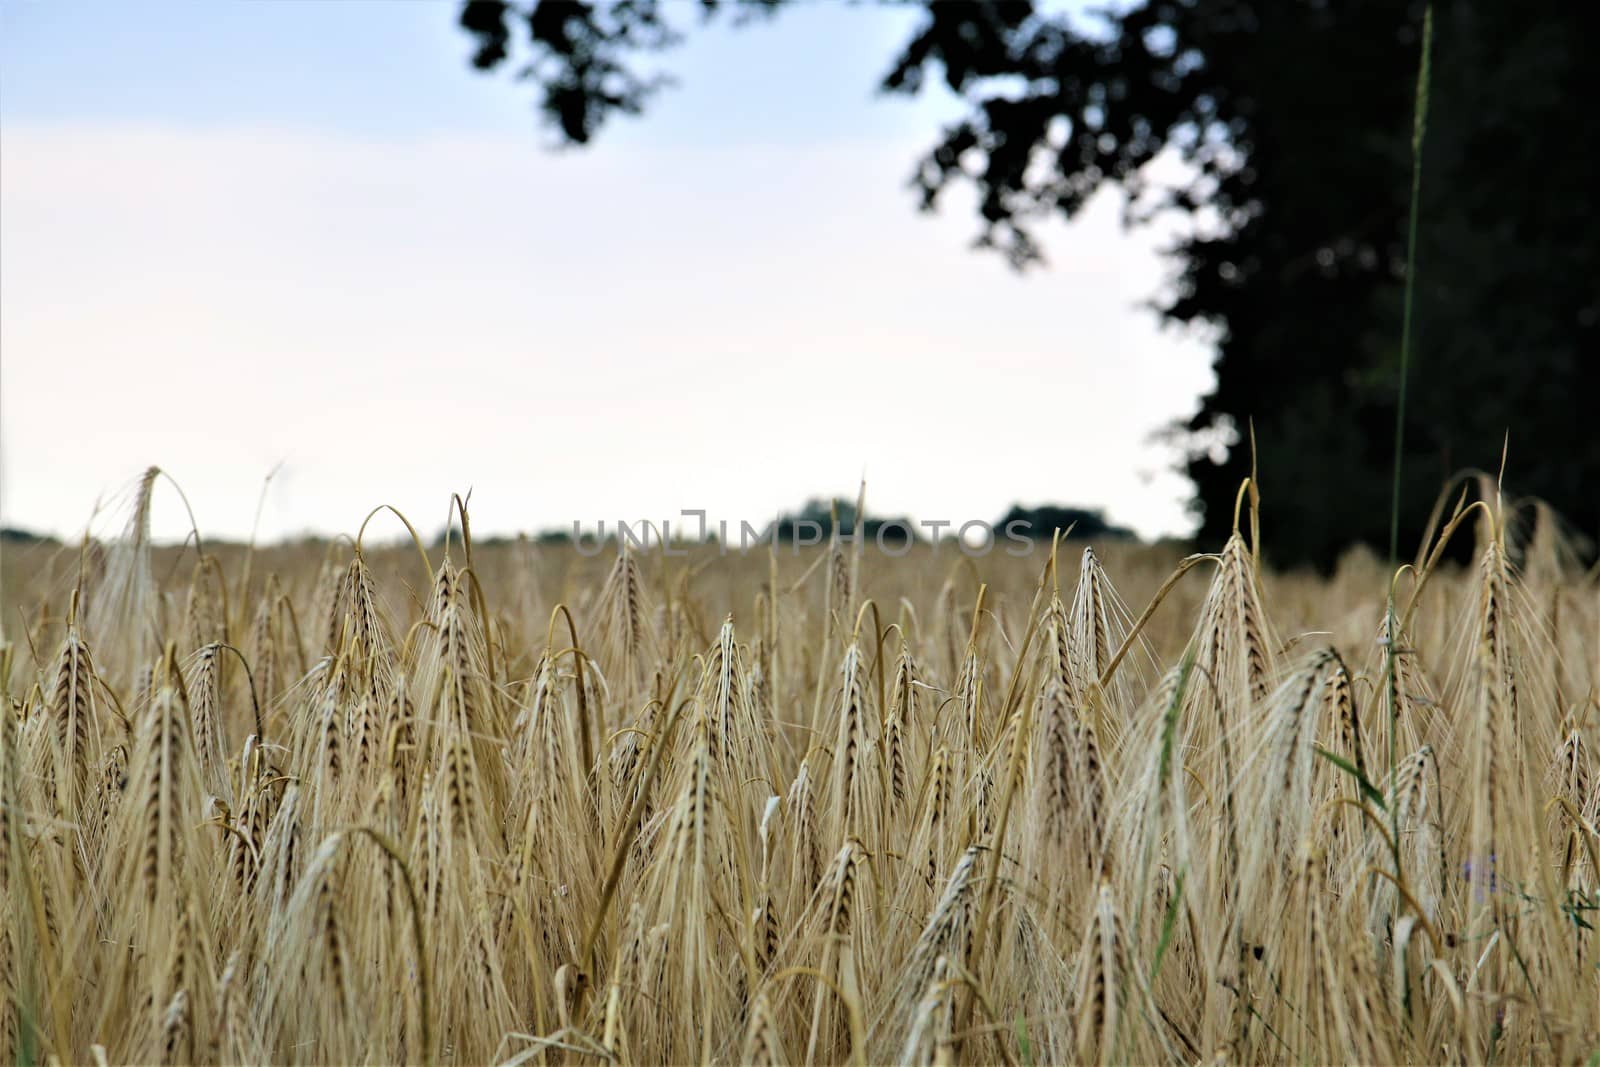 Barley in the field with trees on the side